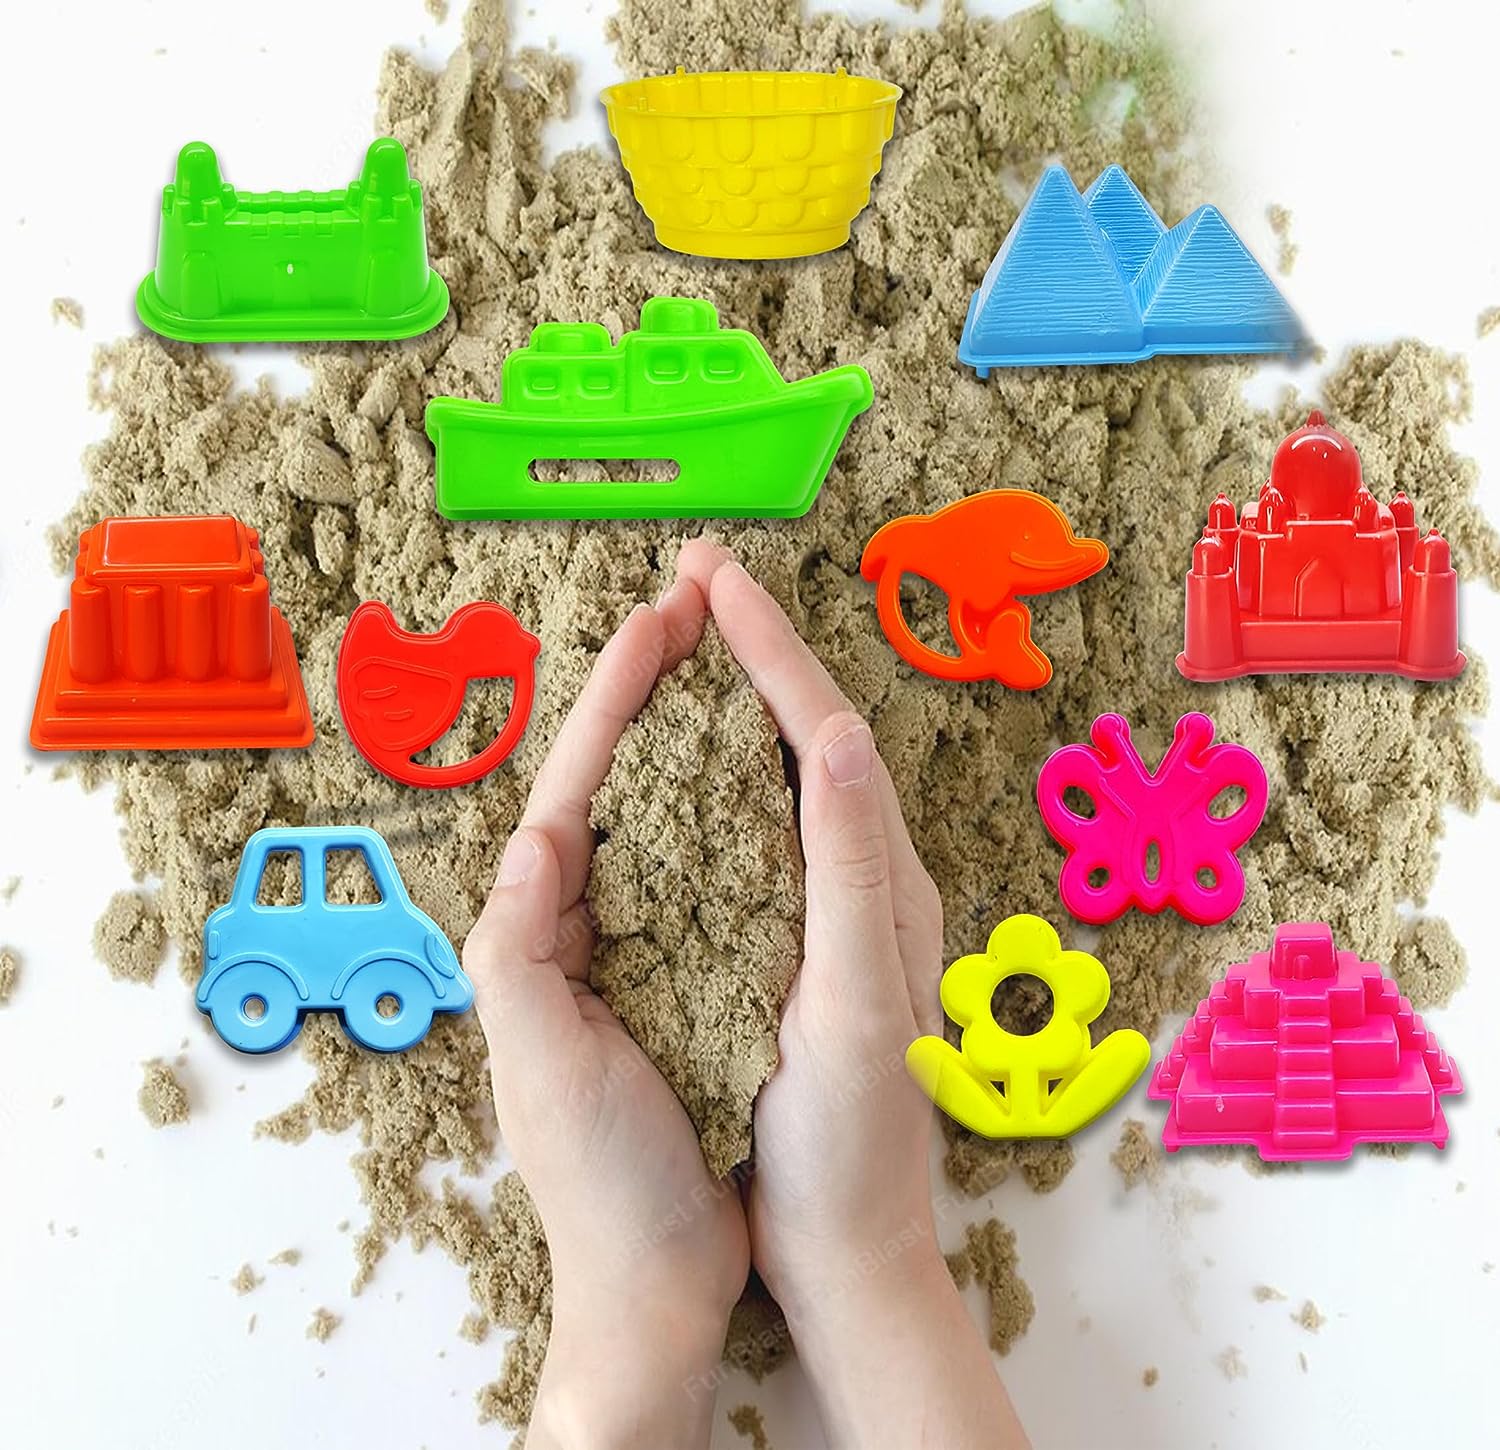 Creative Sand for Kids with Mould